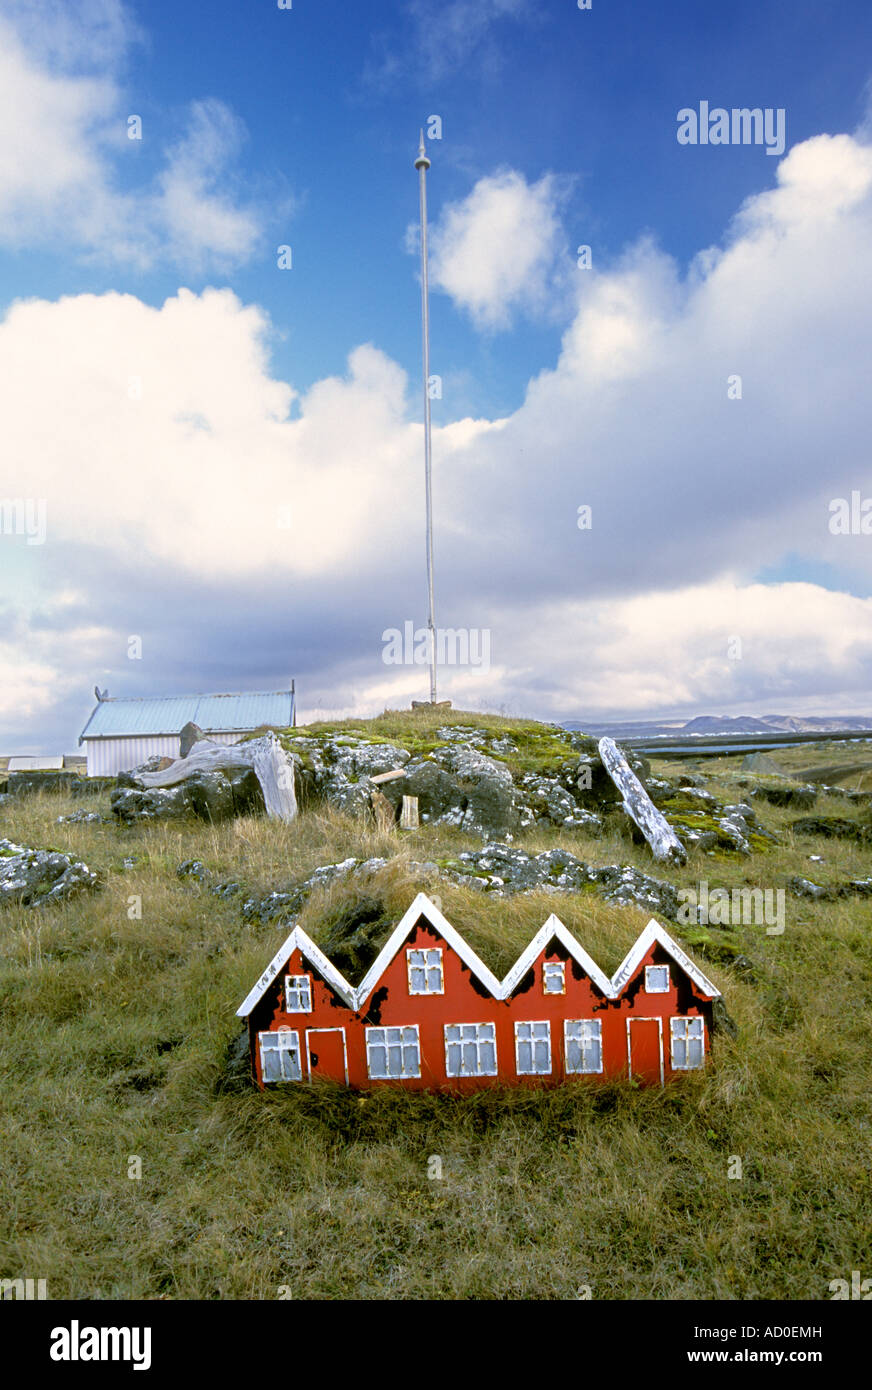 Near Keflavík Iceland A miniature house sits in front of a radio tower Stock Photo